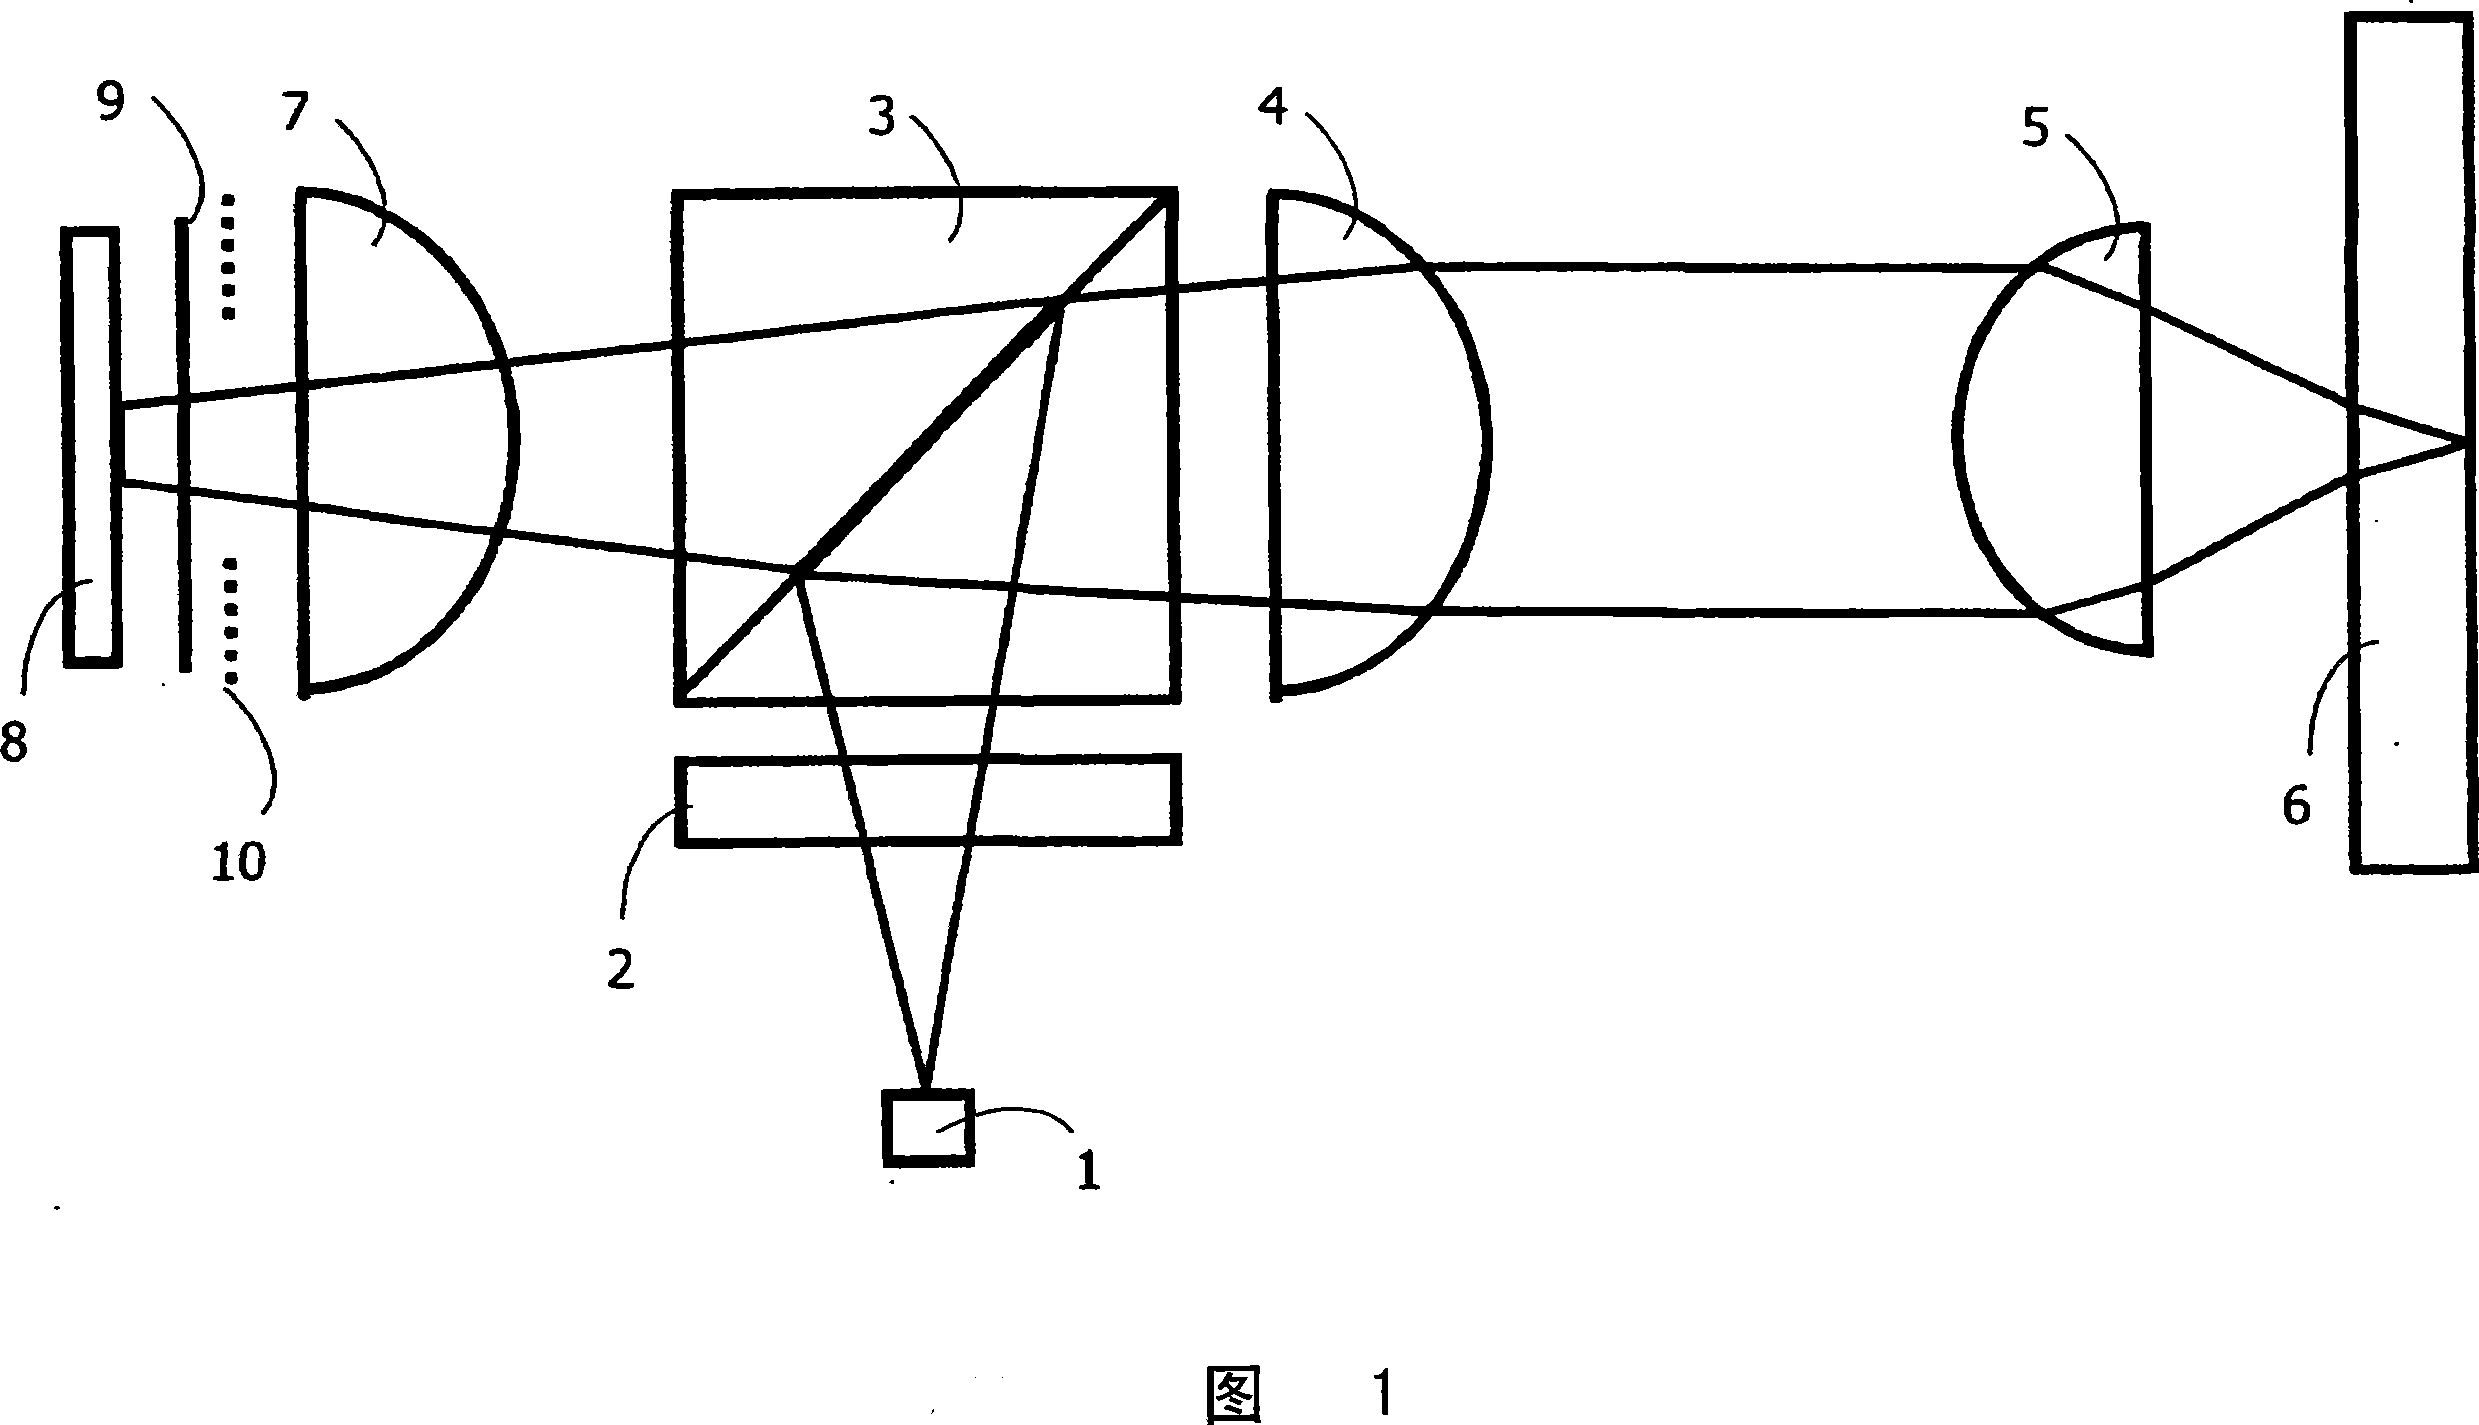 Servo branch of optical disc drive comprising a switchable diaphragm and a device for beam deflection, and methods for measuring beam landing and spherical aberration